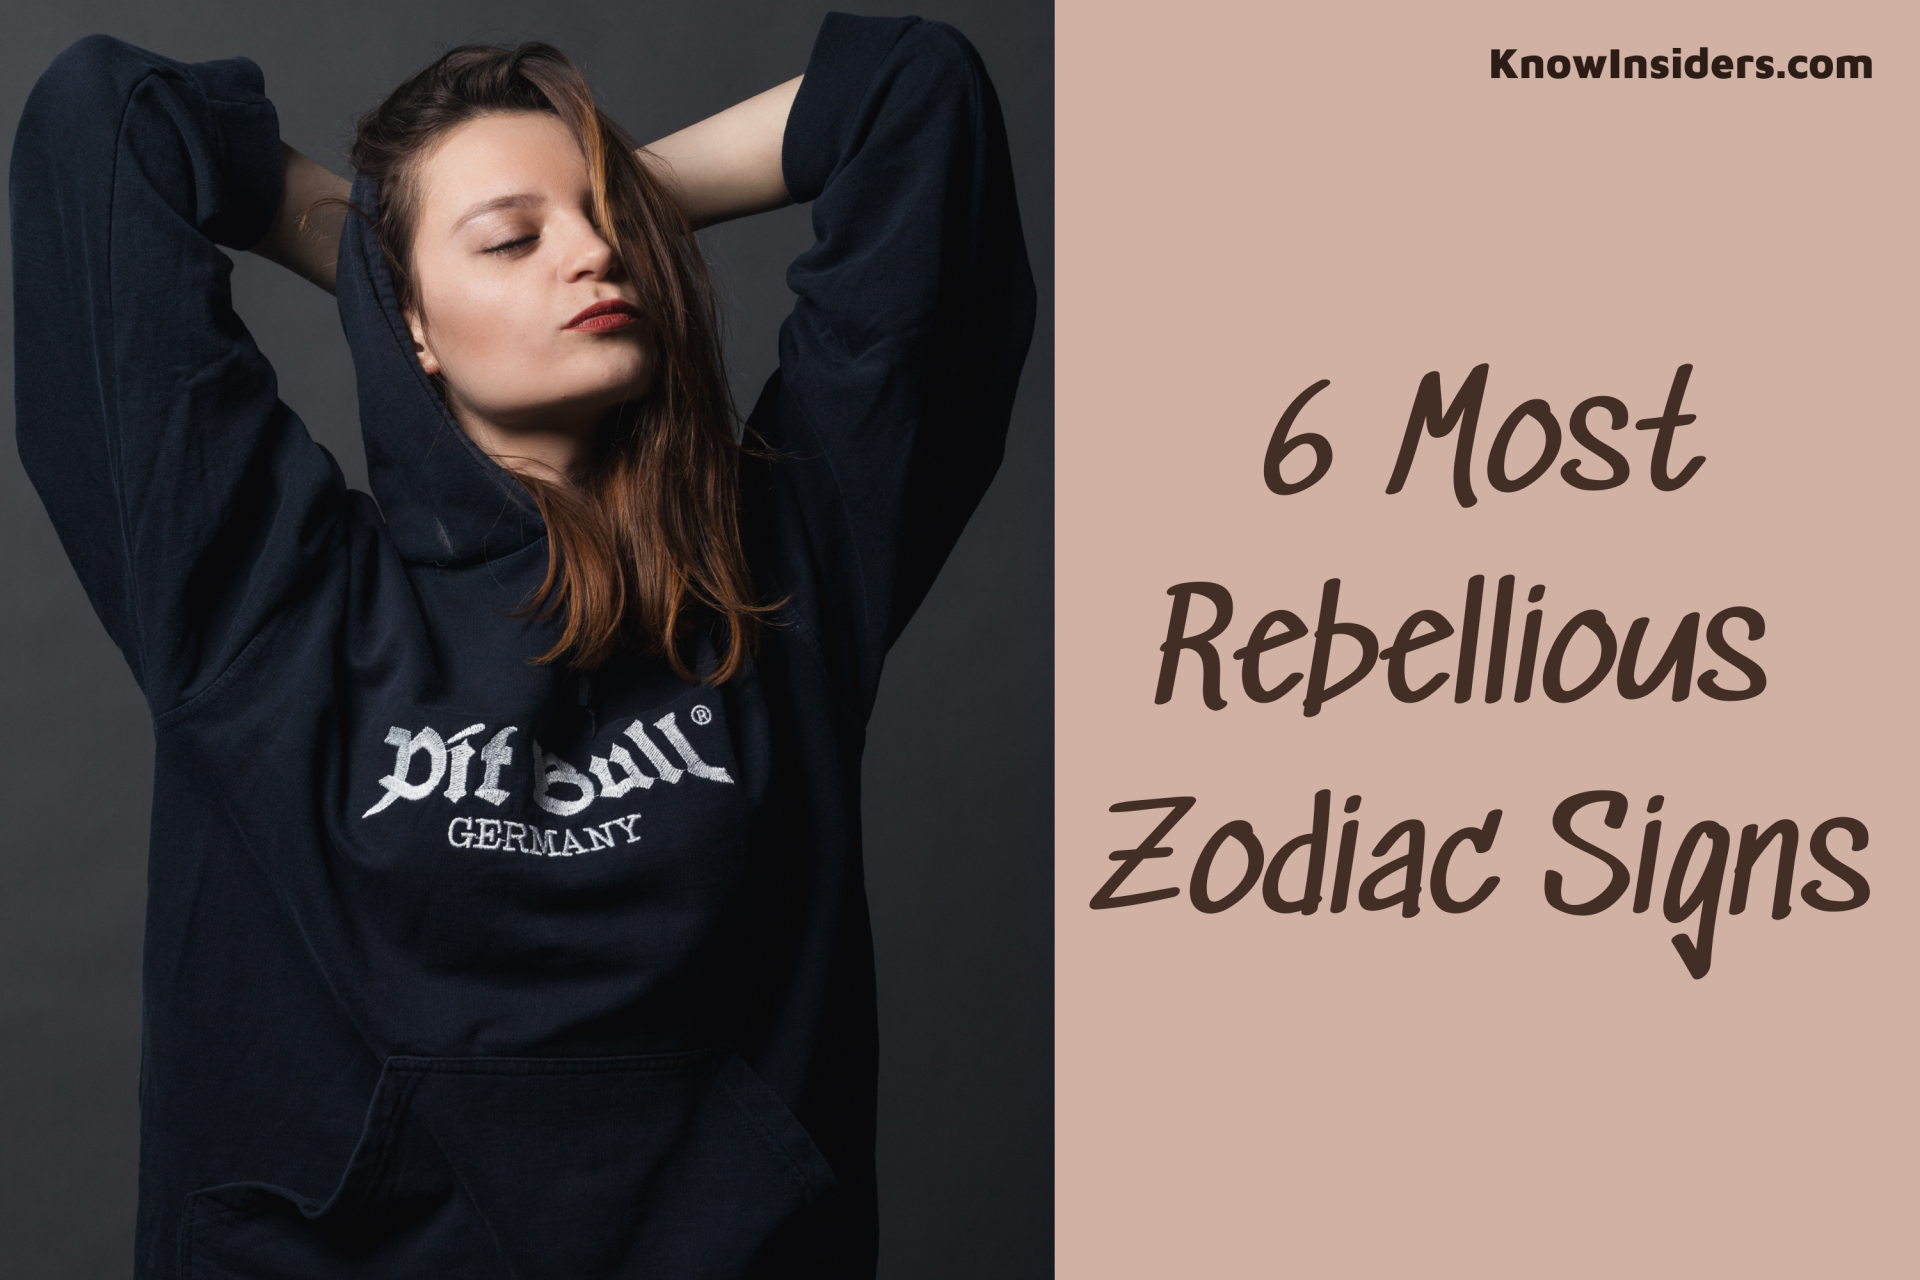 Top 6 Most Rebellious Zodiac Signs, According to Astrology